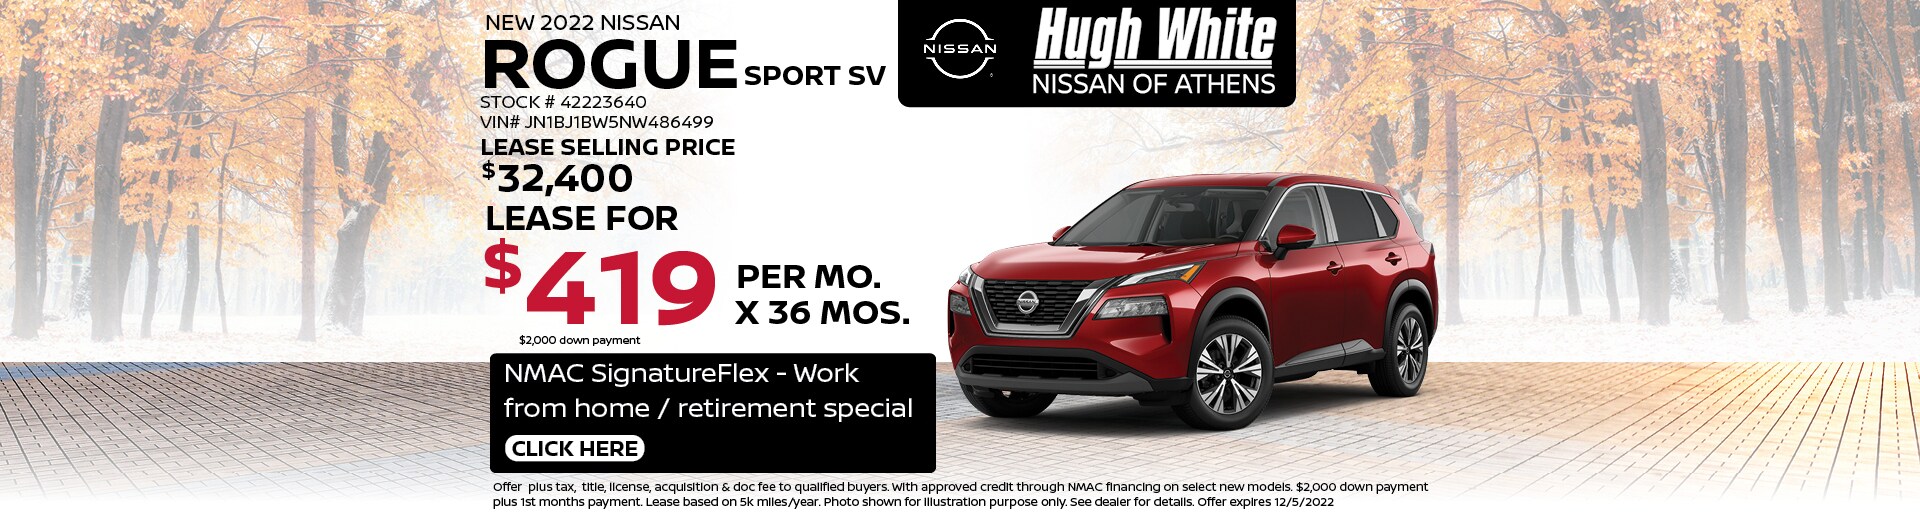 2022 Nissan Rogue Lease Offer | Hugh White Nissan Athens